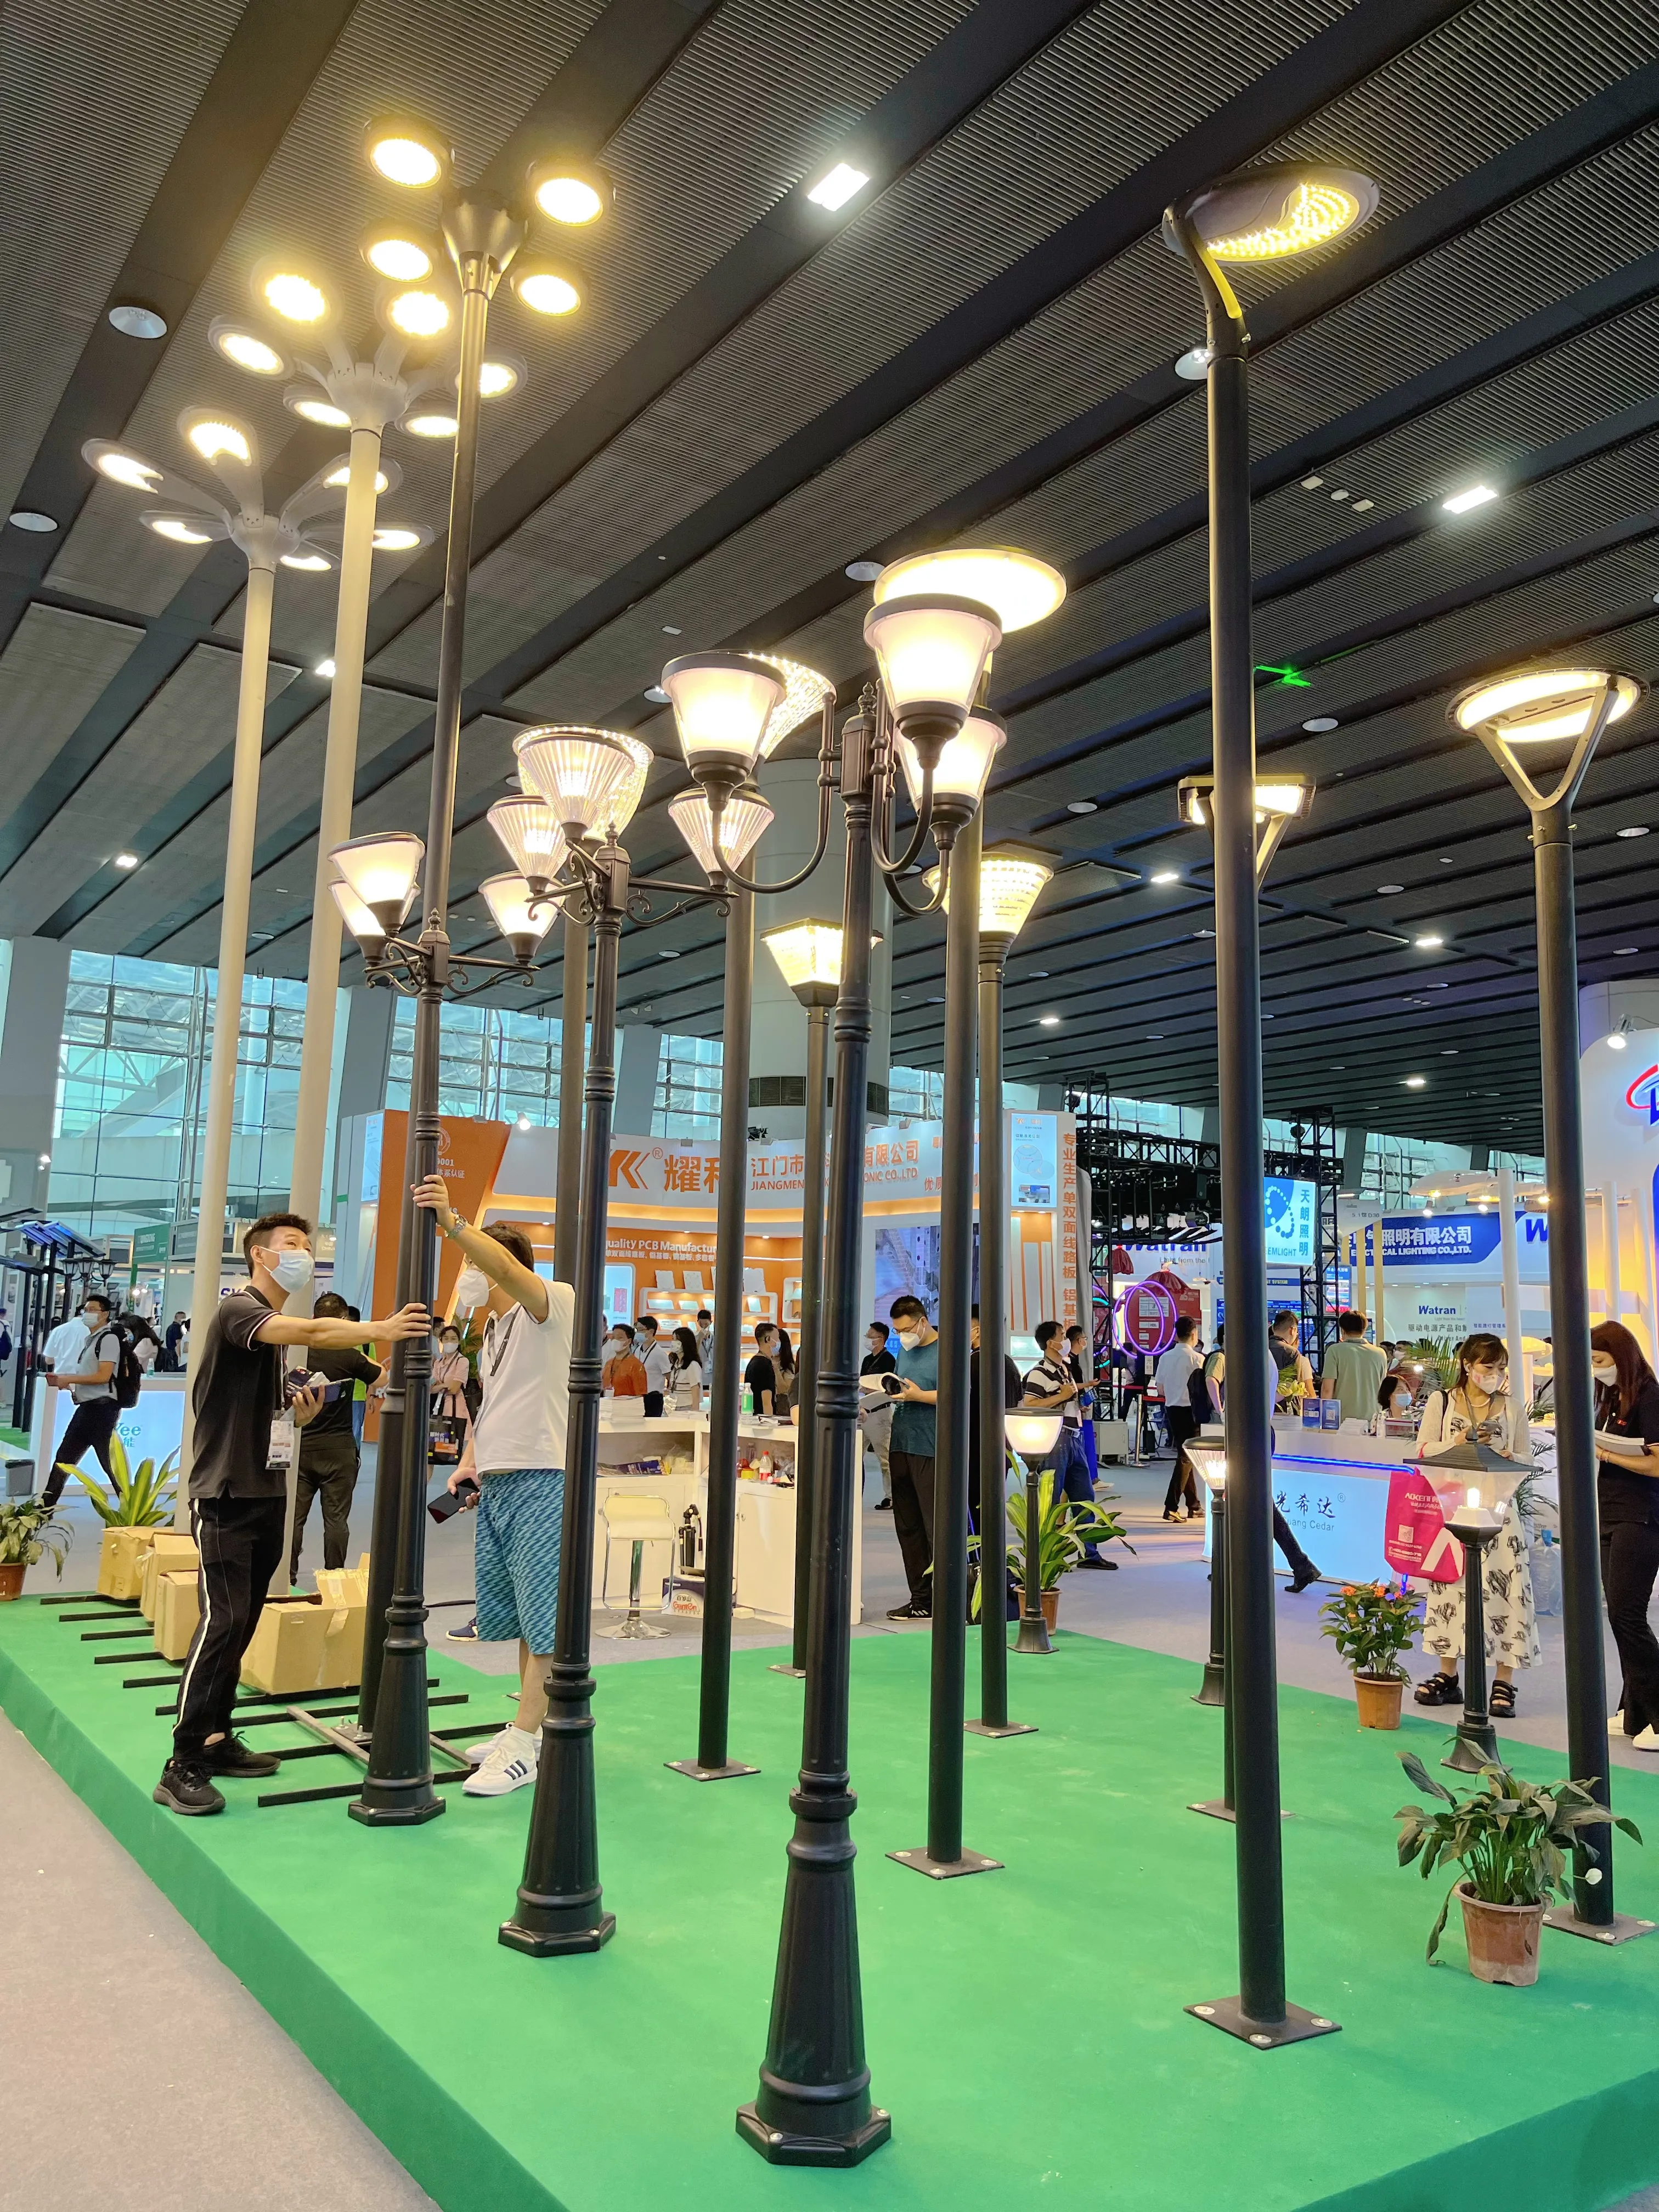 Solar Pole Light: Leading the Sustainable Energy Revolution for Lighting the Future